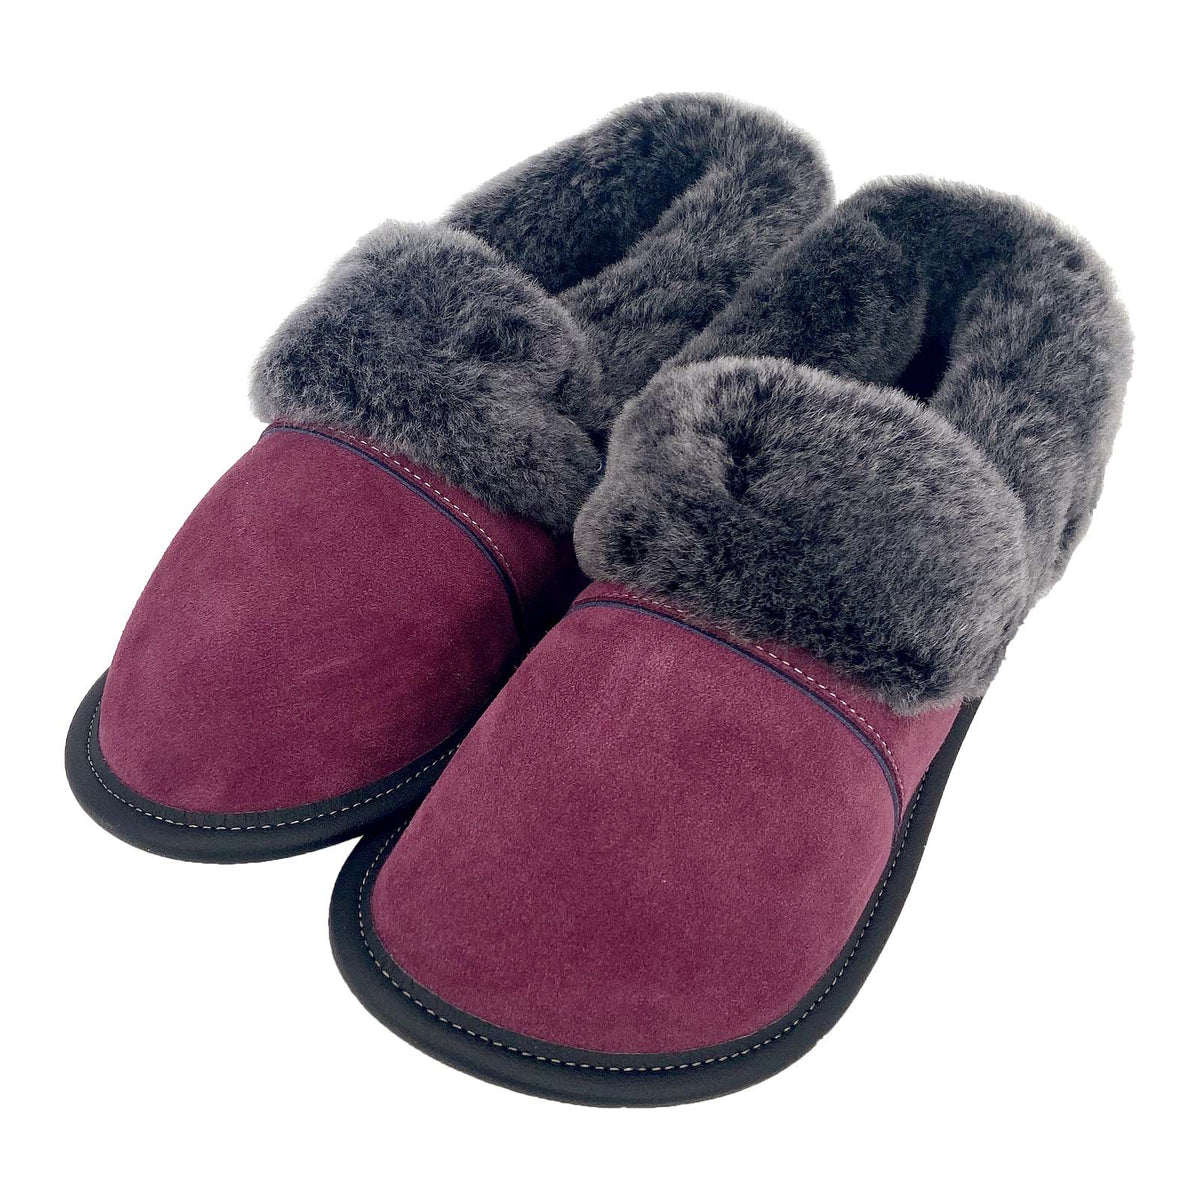 100% Real Fur Lined Hand crafted Men's Women's Genuine Sheepskin Mule Slippers 